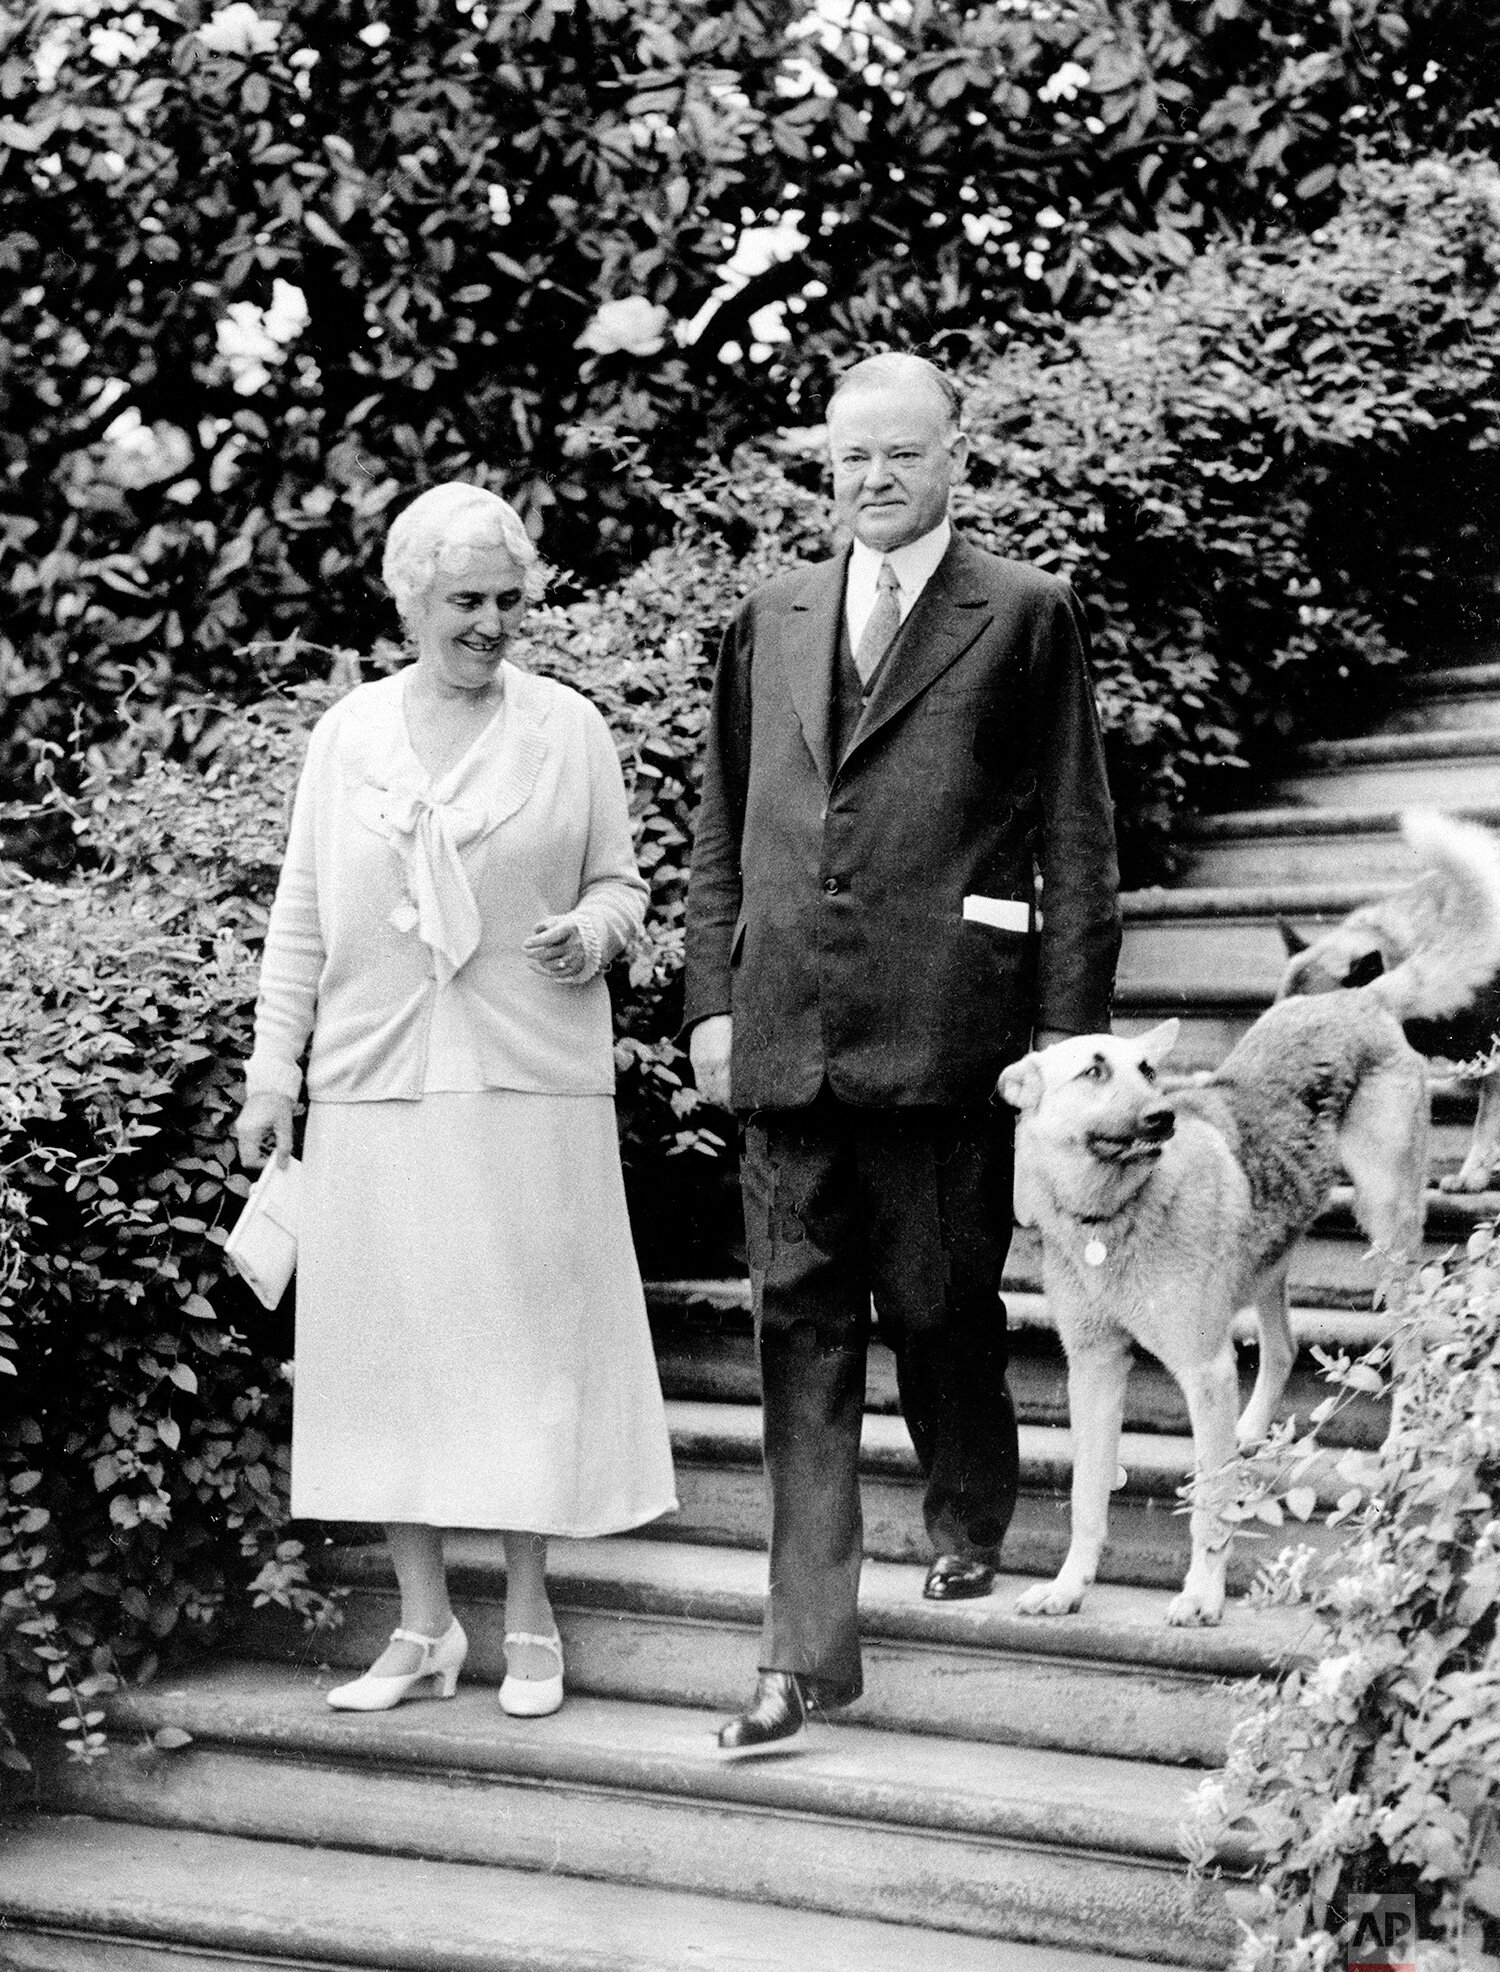  U.S. President Herbert Hoover, right, is shown with first lady Lou Henry Hoover and their dogs in Washington, D.C., on June 15, 1932.  (AP Photo) 